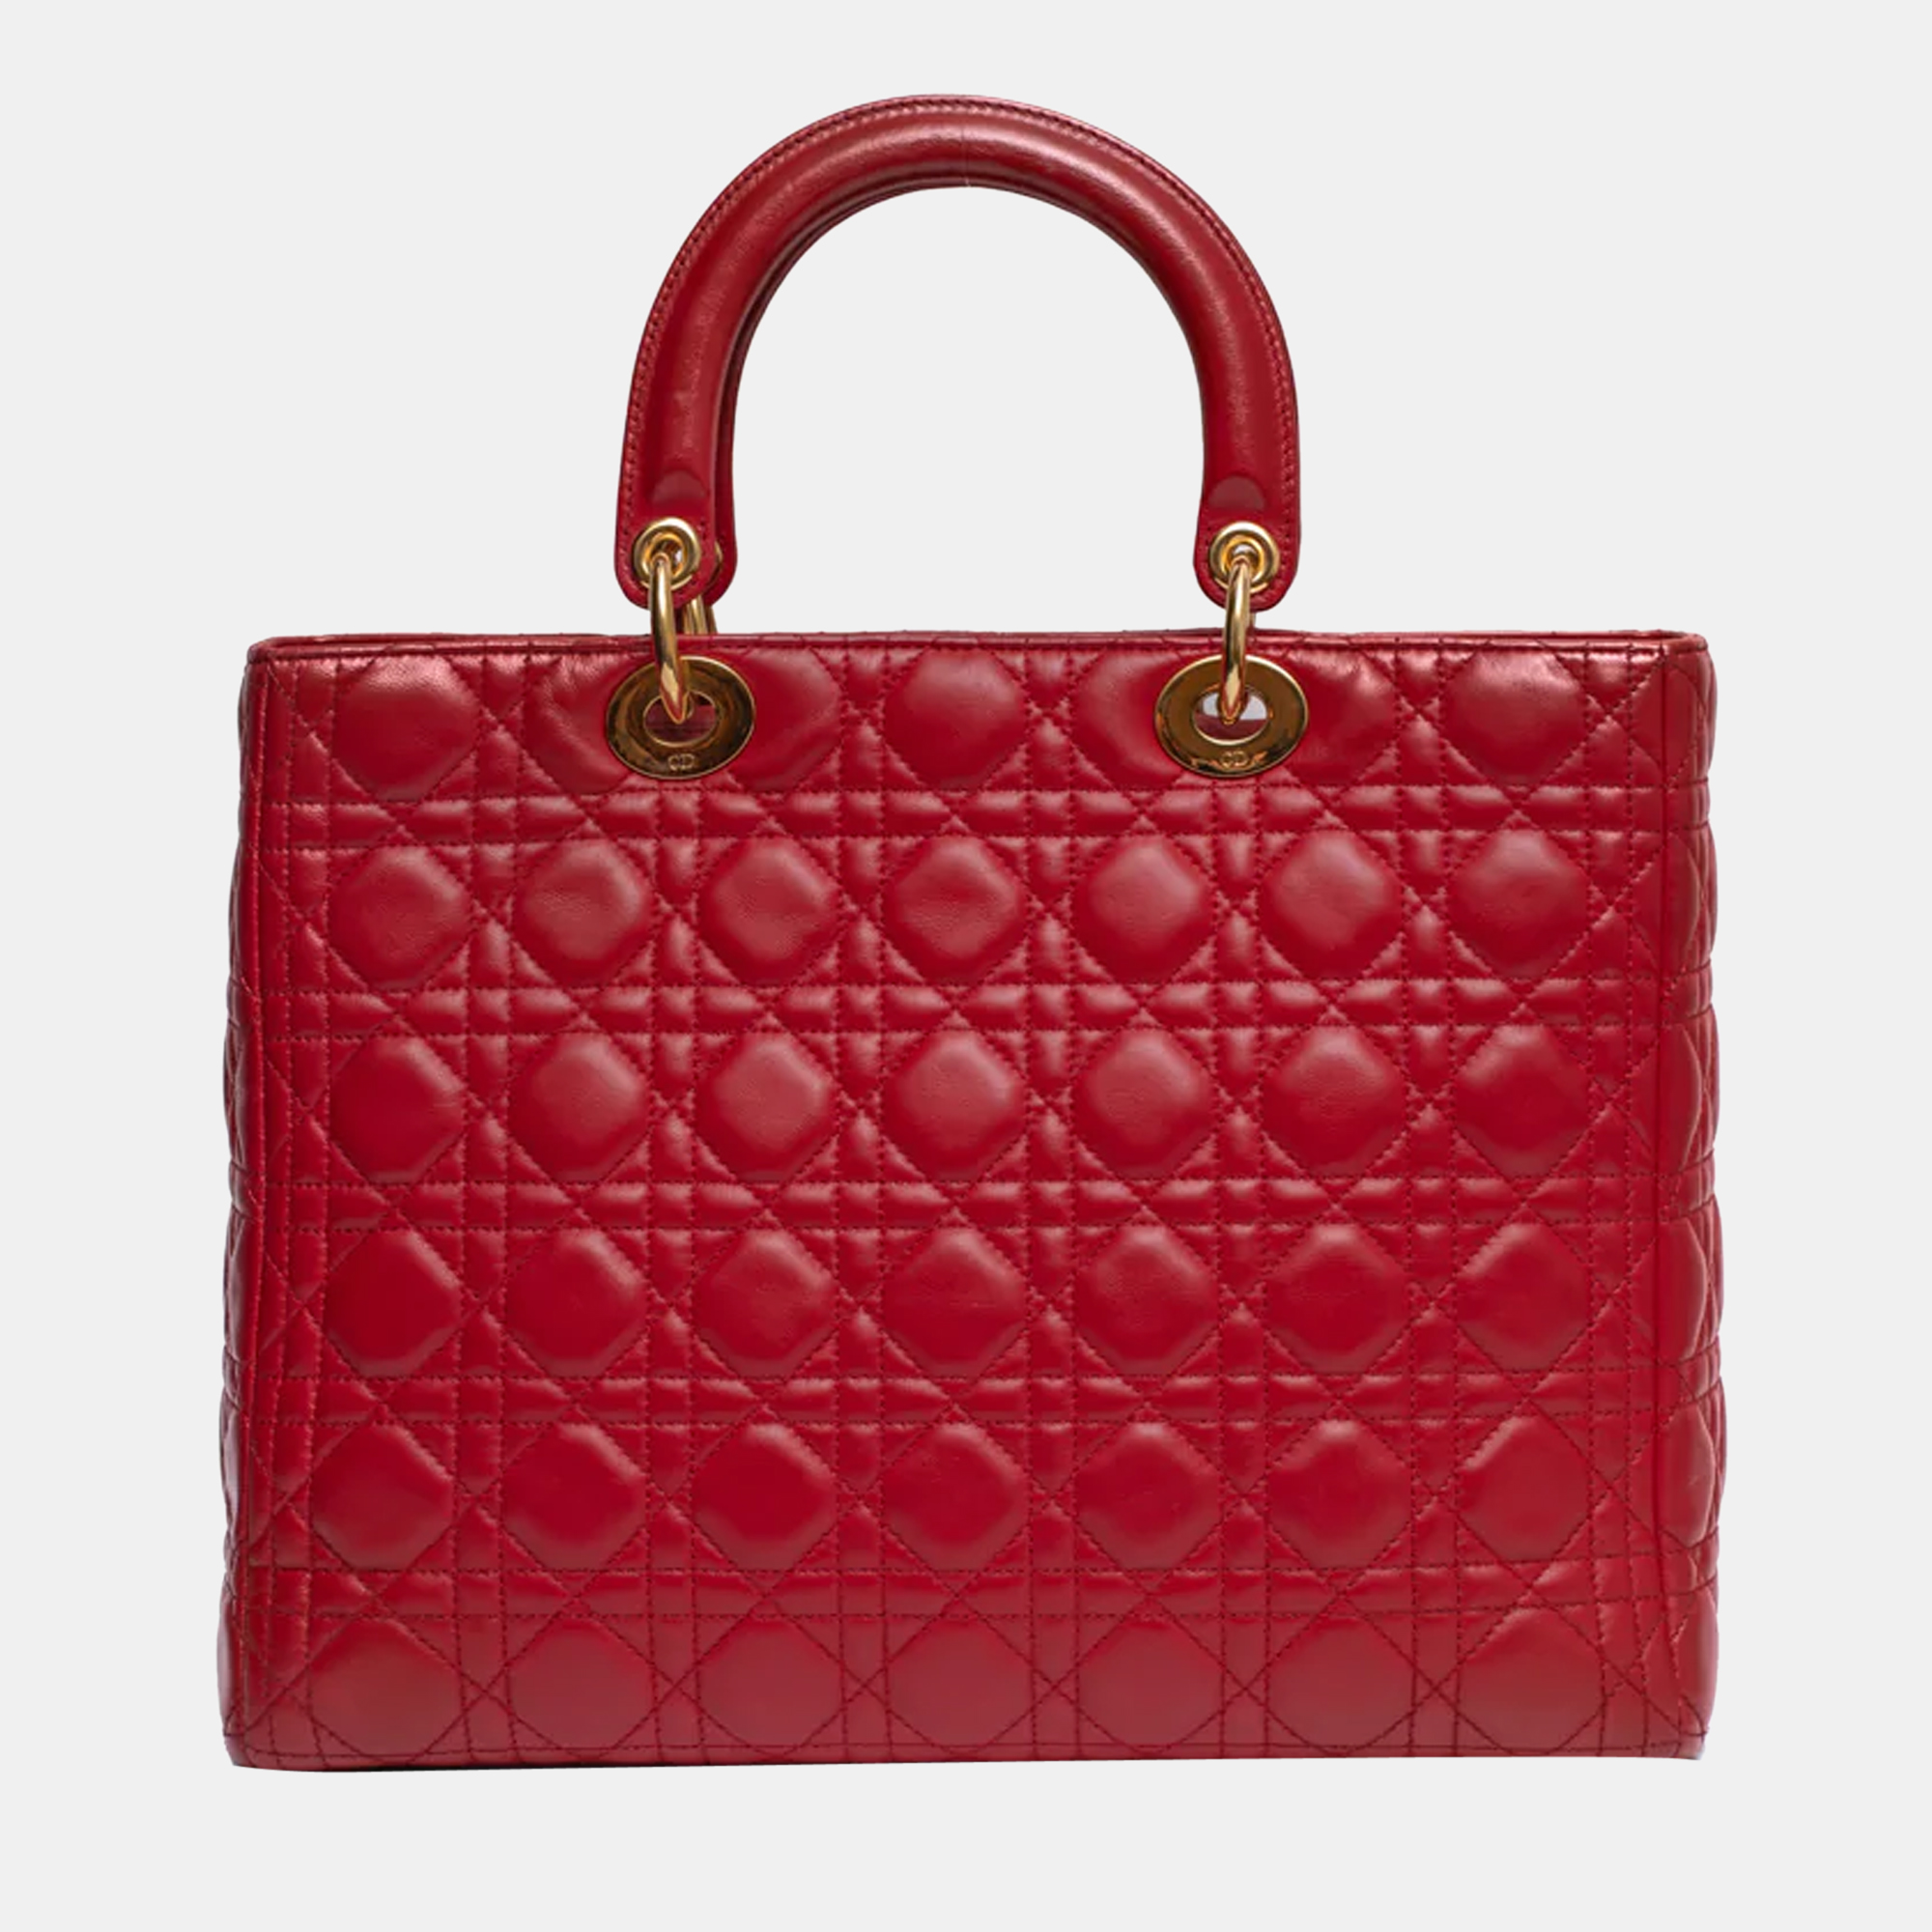 Dior Red Cannage Leather Medium Lady Dior Tote Bag